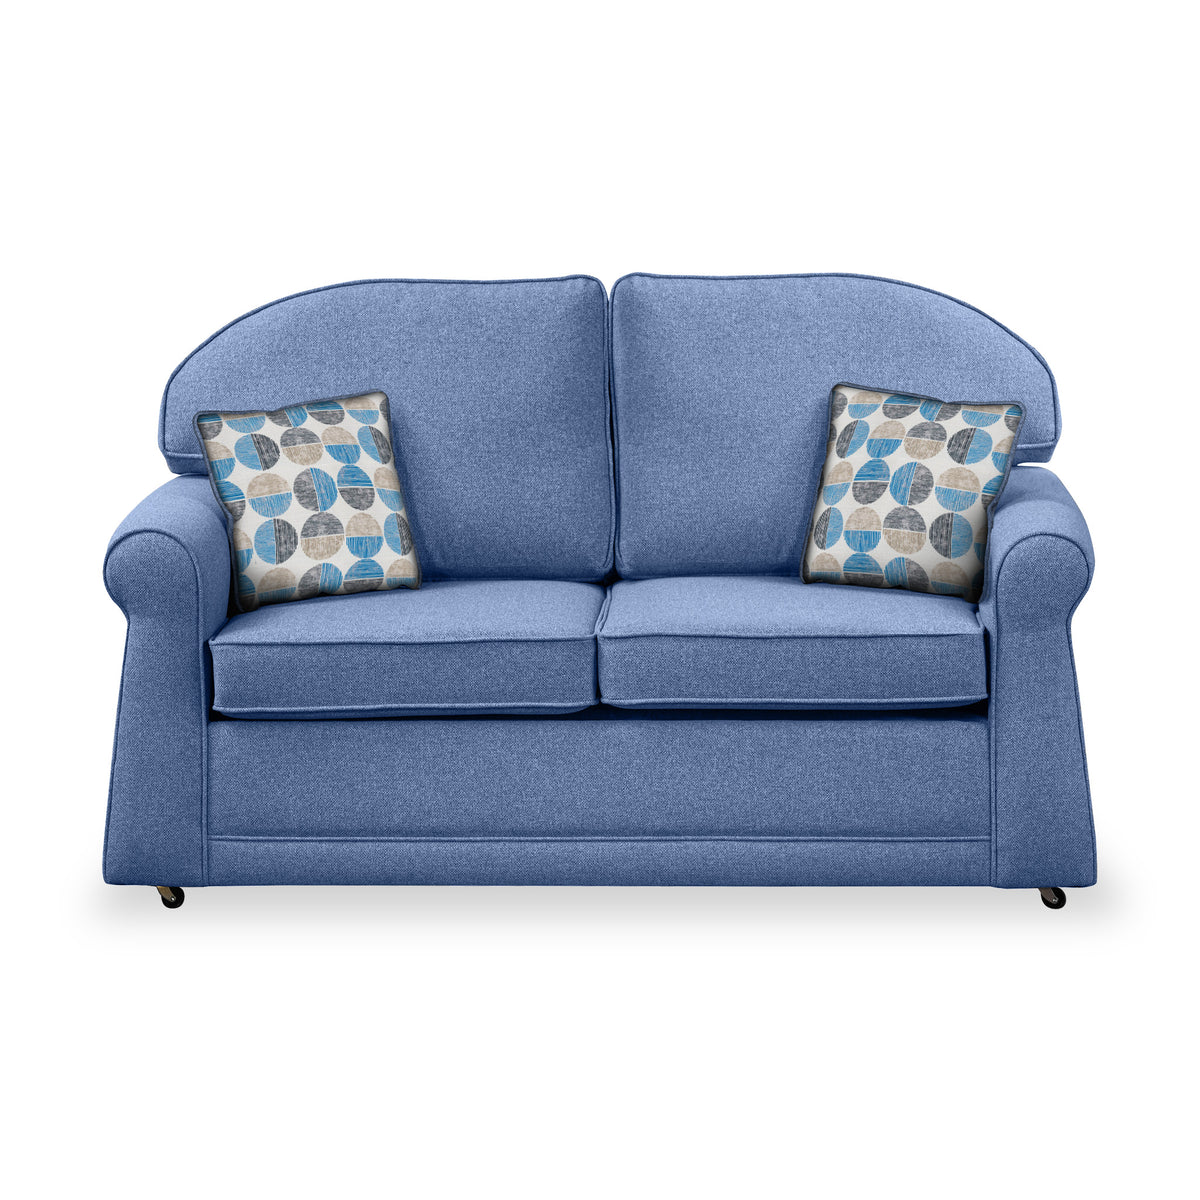 Croxdon Denim Faux Linen 2 Seater Sofabed with Blue Scatter Cushions from Roseland Furniture